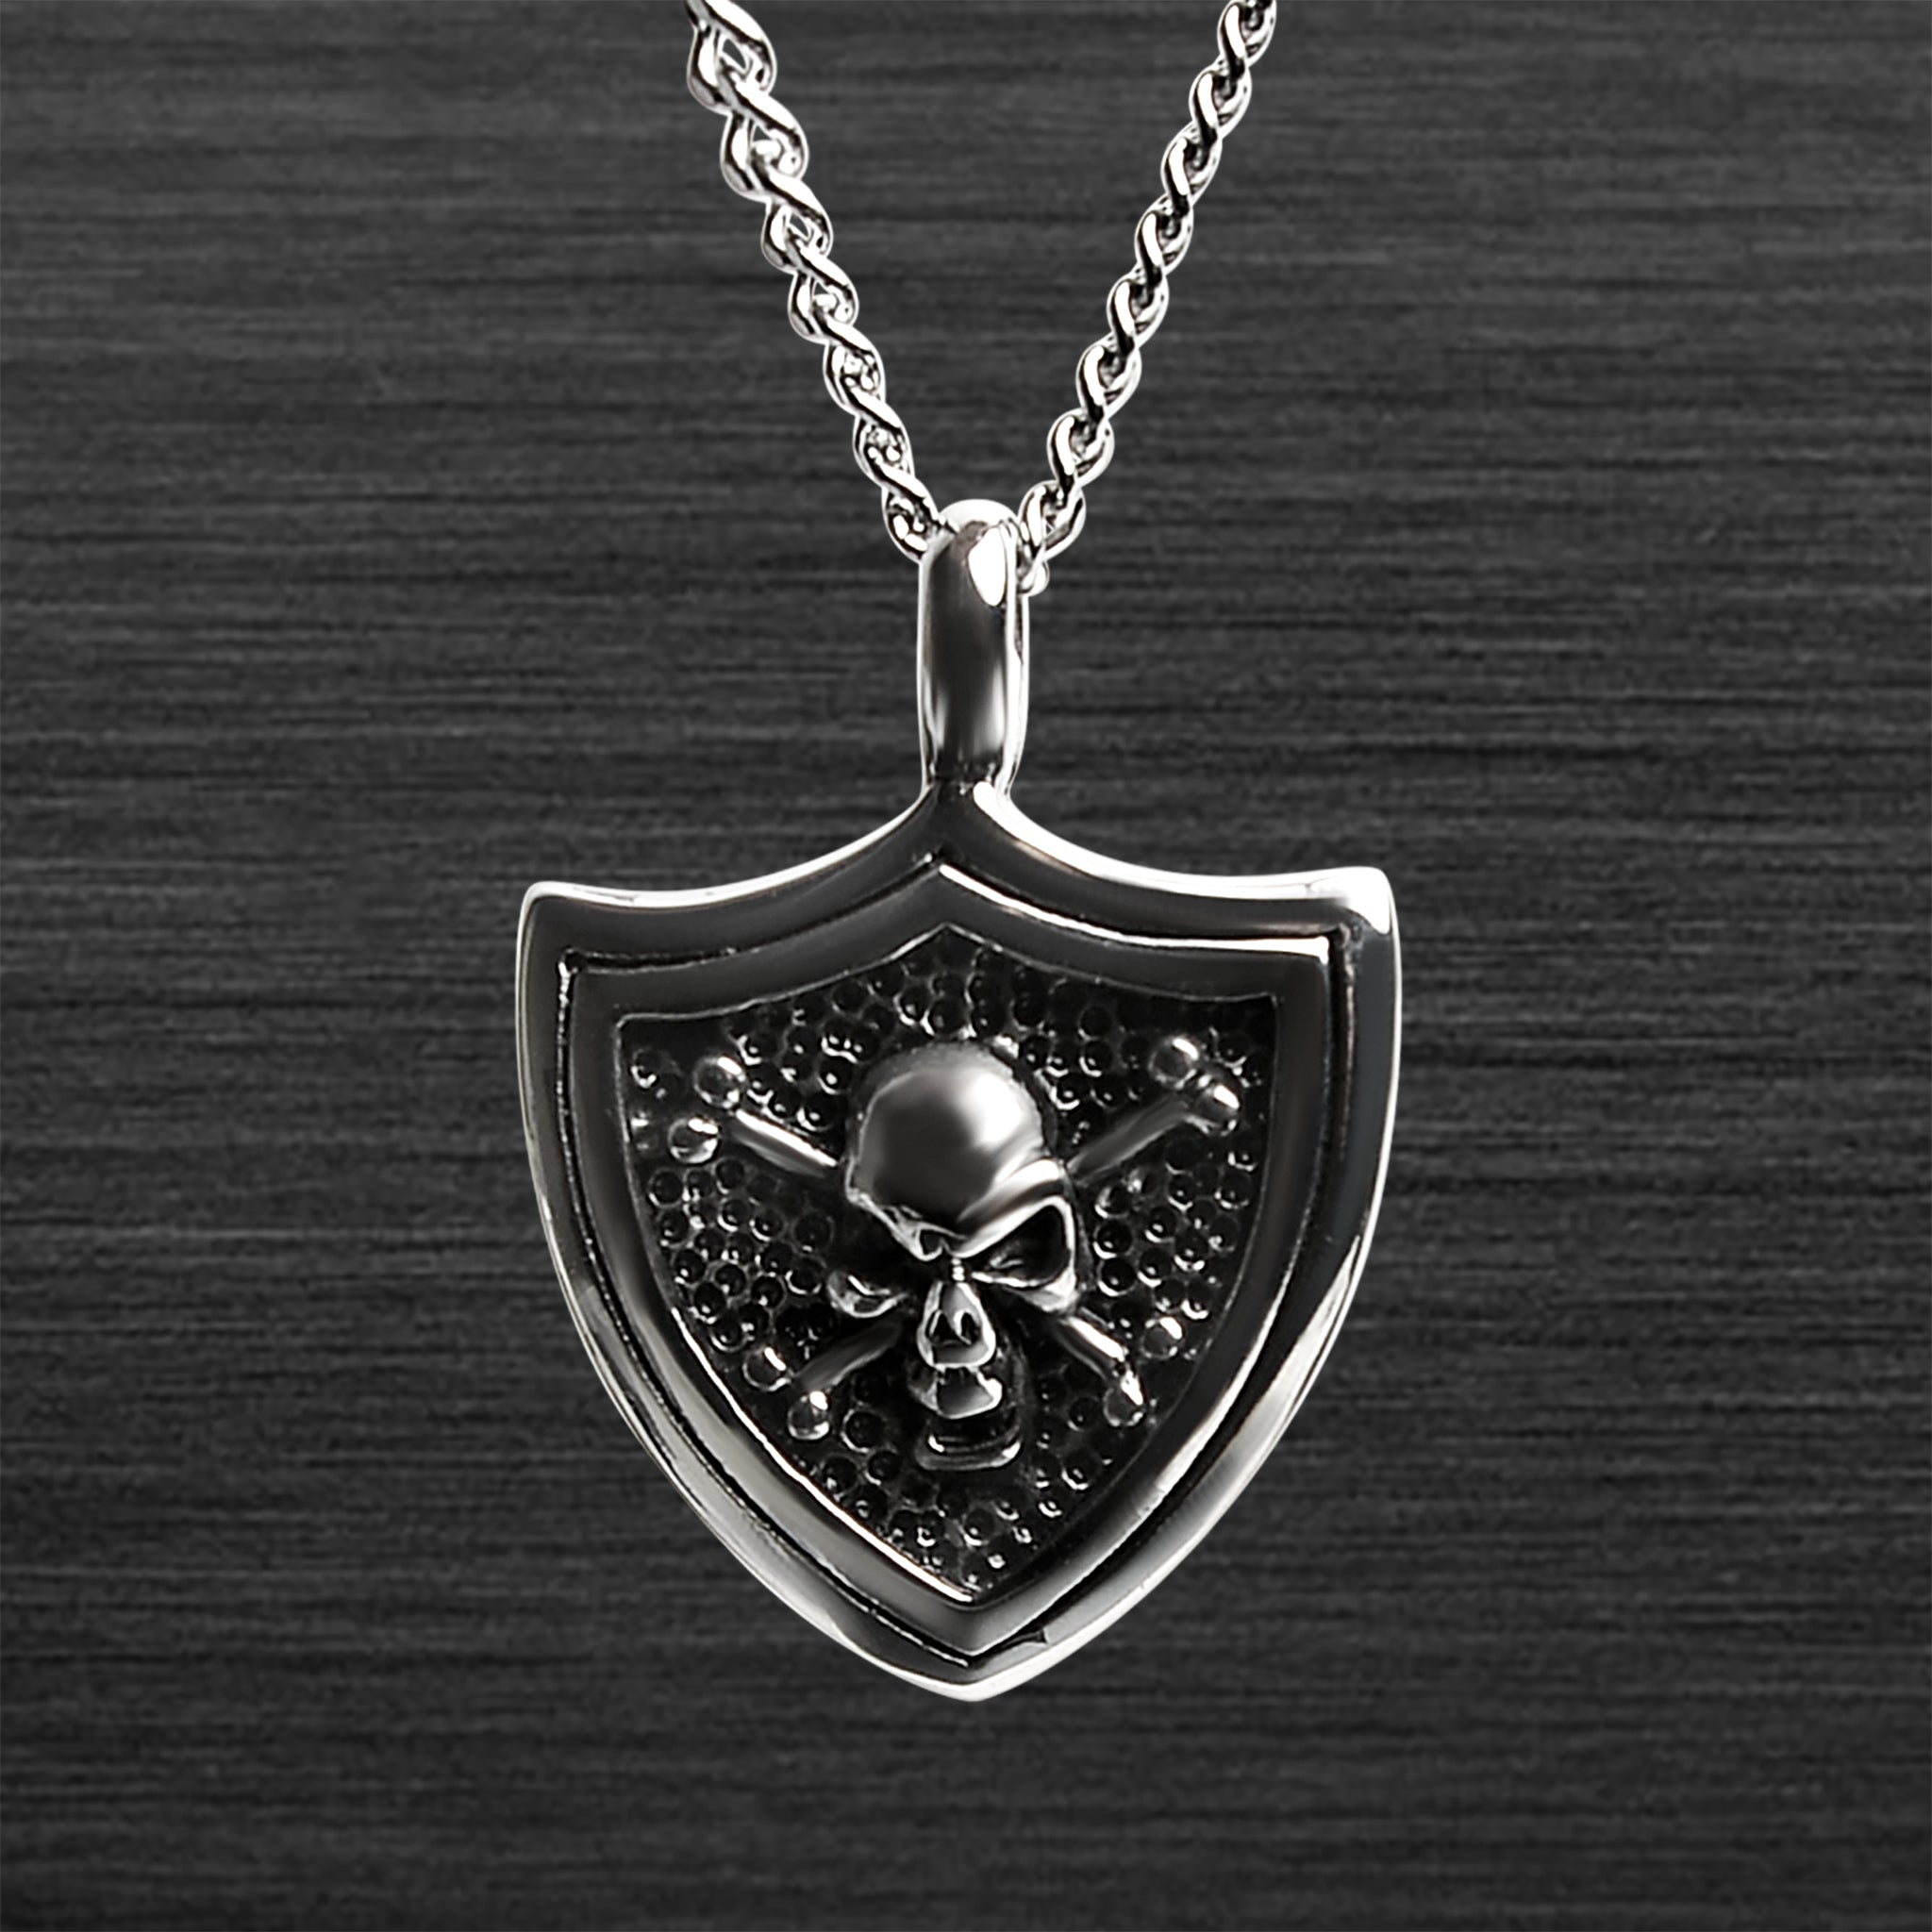 Stainless Steel SKULL And Crossbones Shield Curb Chain Necklace / PDK0150-RTL